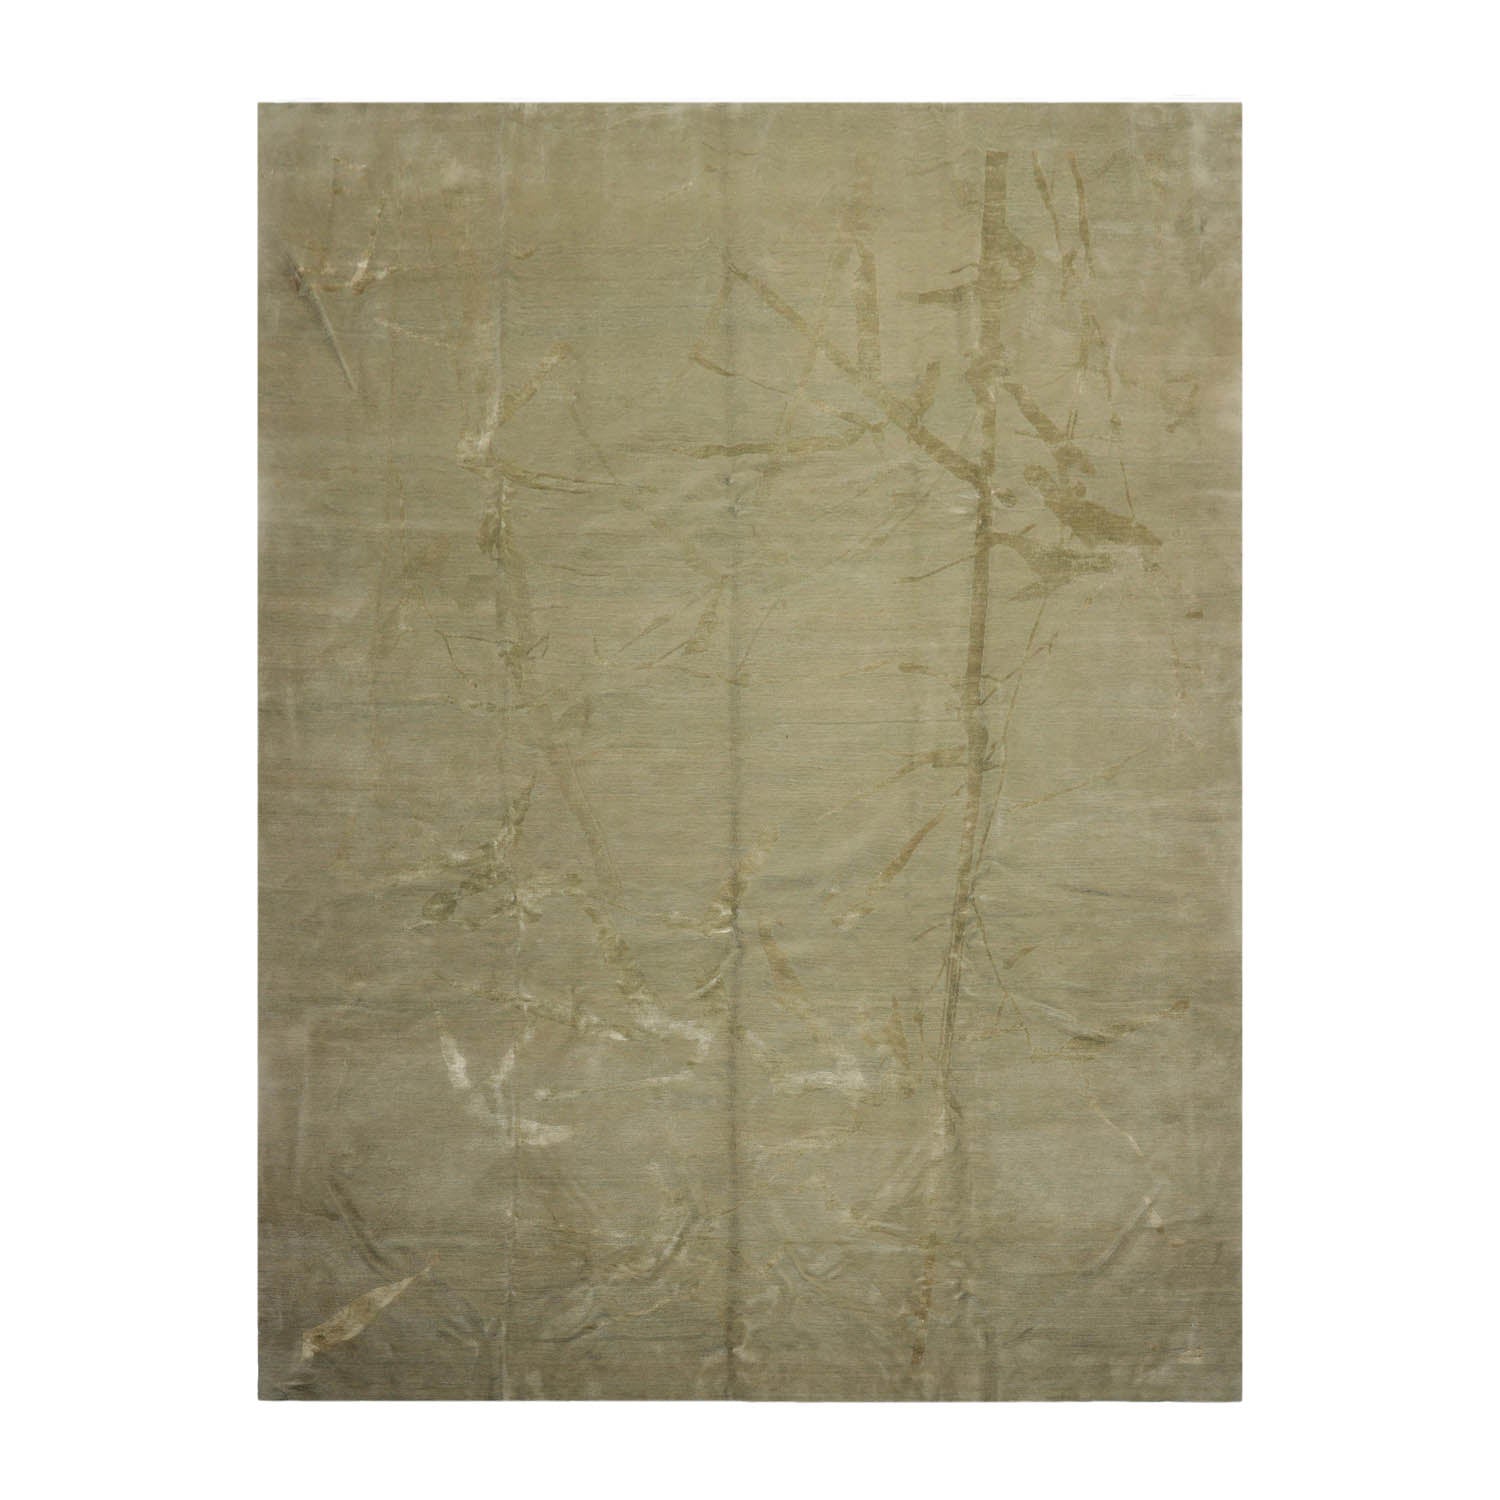 Fregoso 9x12 Hand Knotted Tibetan 100% Wool Modern & Contemporary Oriental Area Rug Moss, Tone On Tone Color